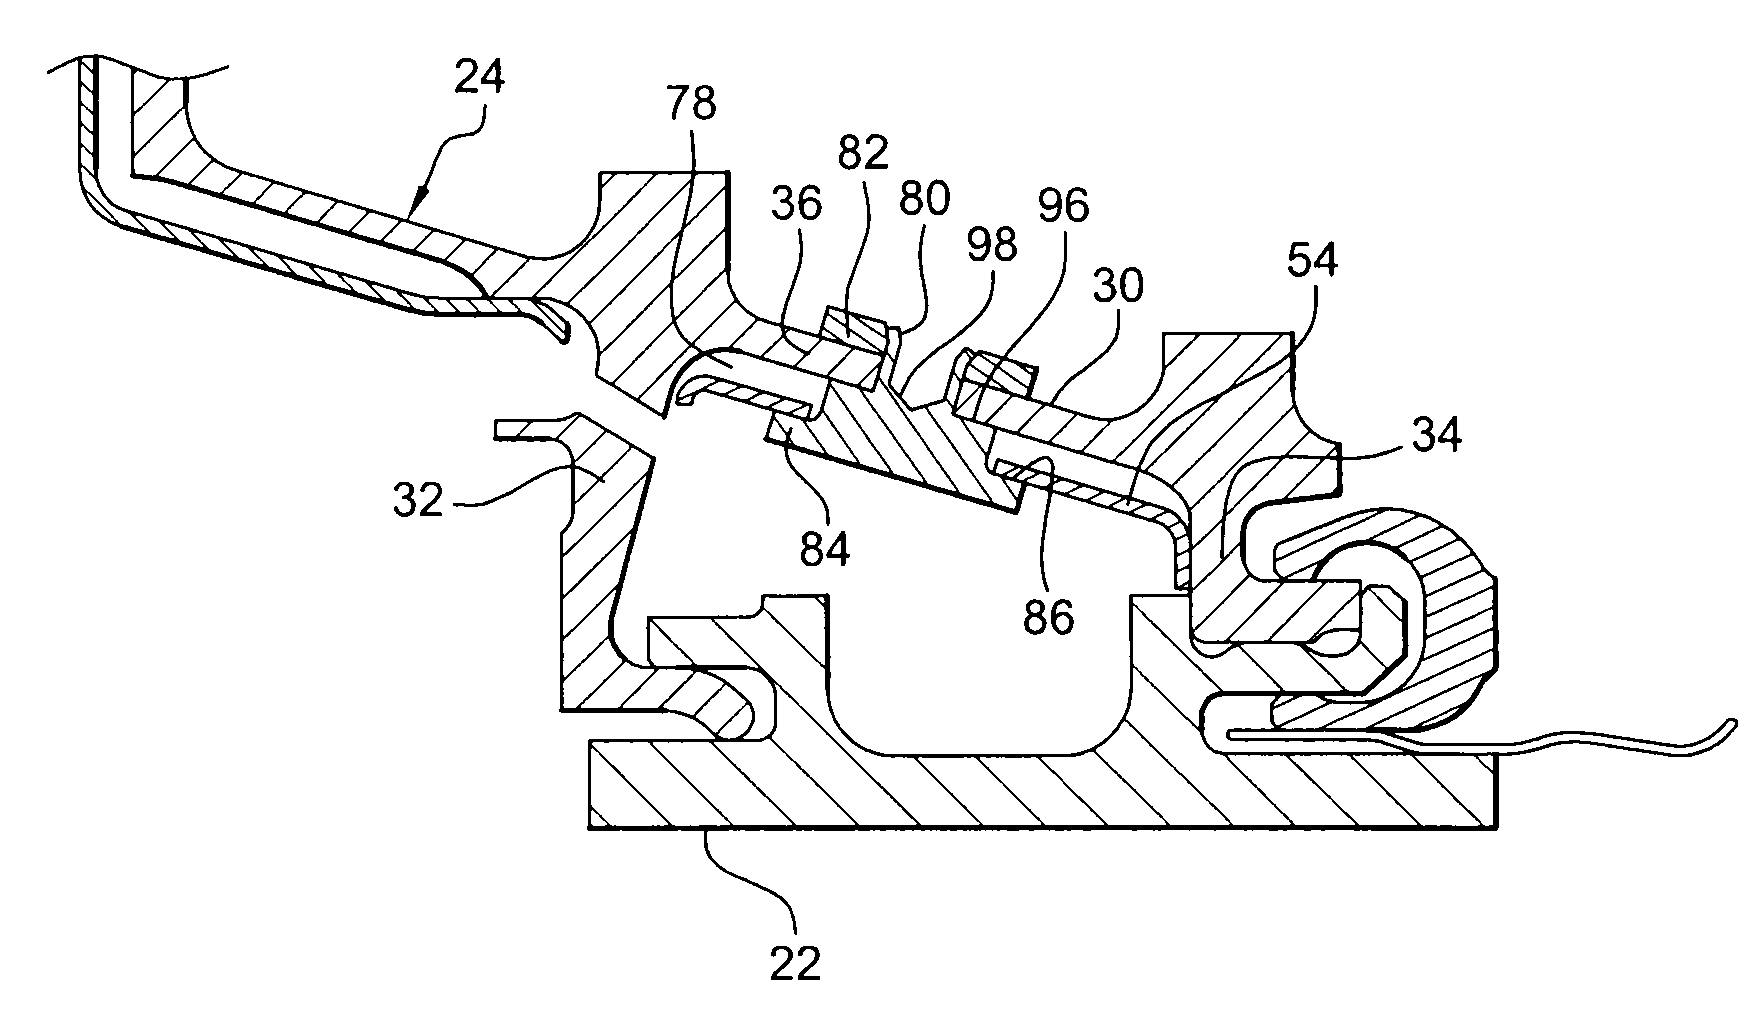 Control of clearance at blade tips in a high-pressure turbine of a turbine engine